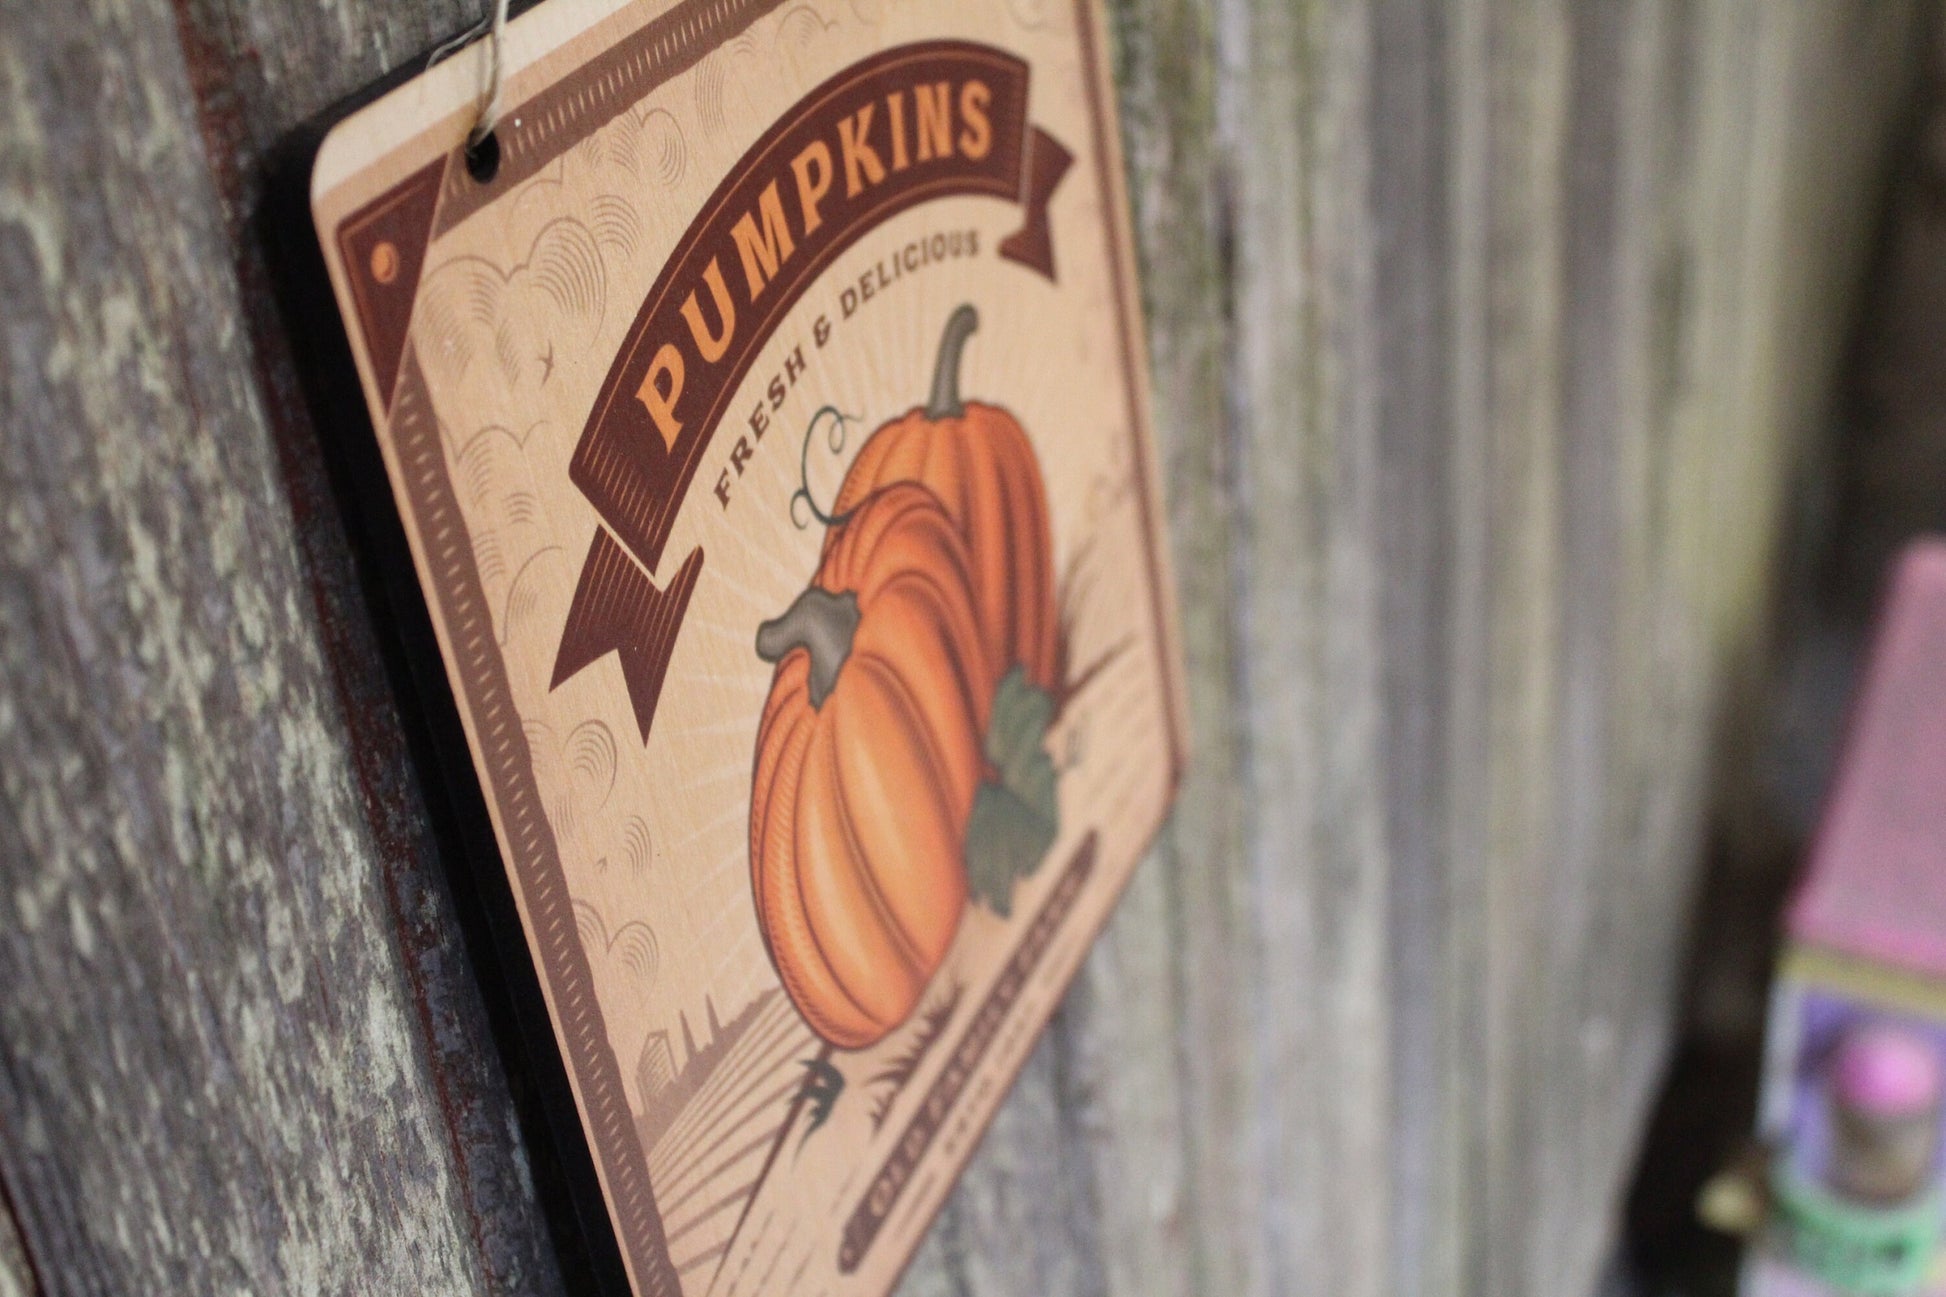 Pumpkin Farm Wood Sign Fall Harvest Wall Decor Autumn Wall Hanging Wooden Family Farm Established Rustic Country